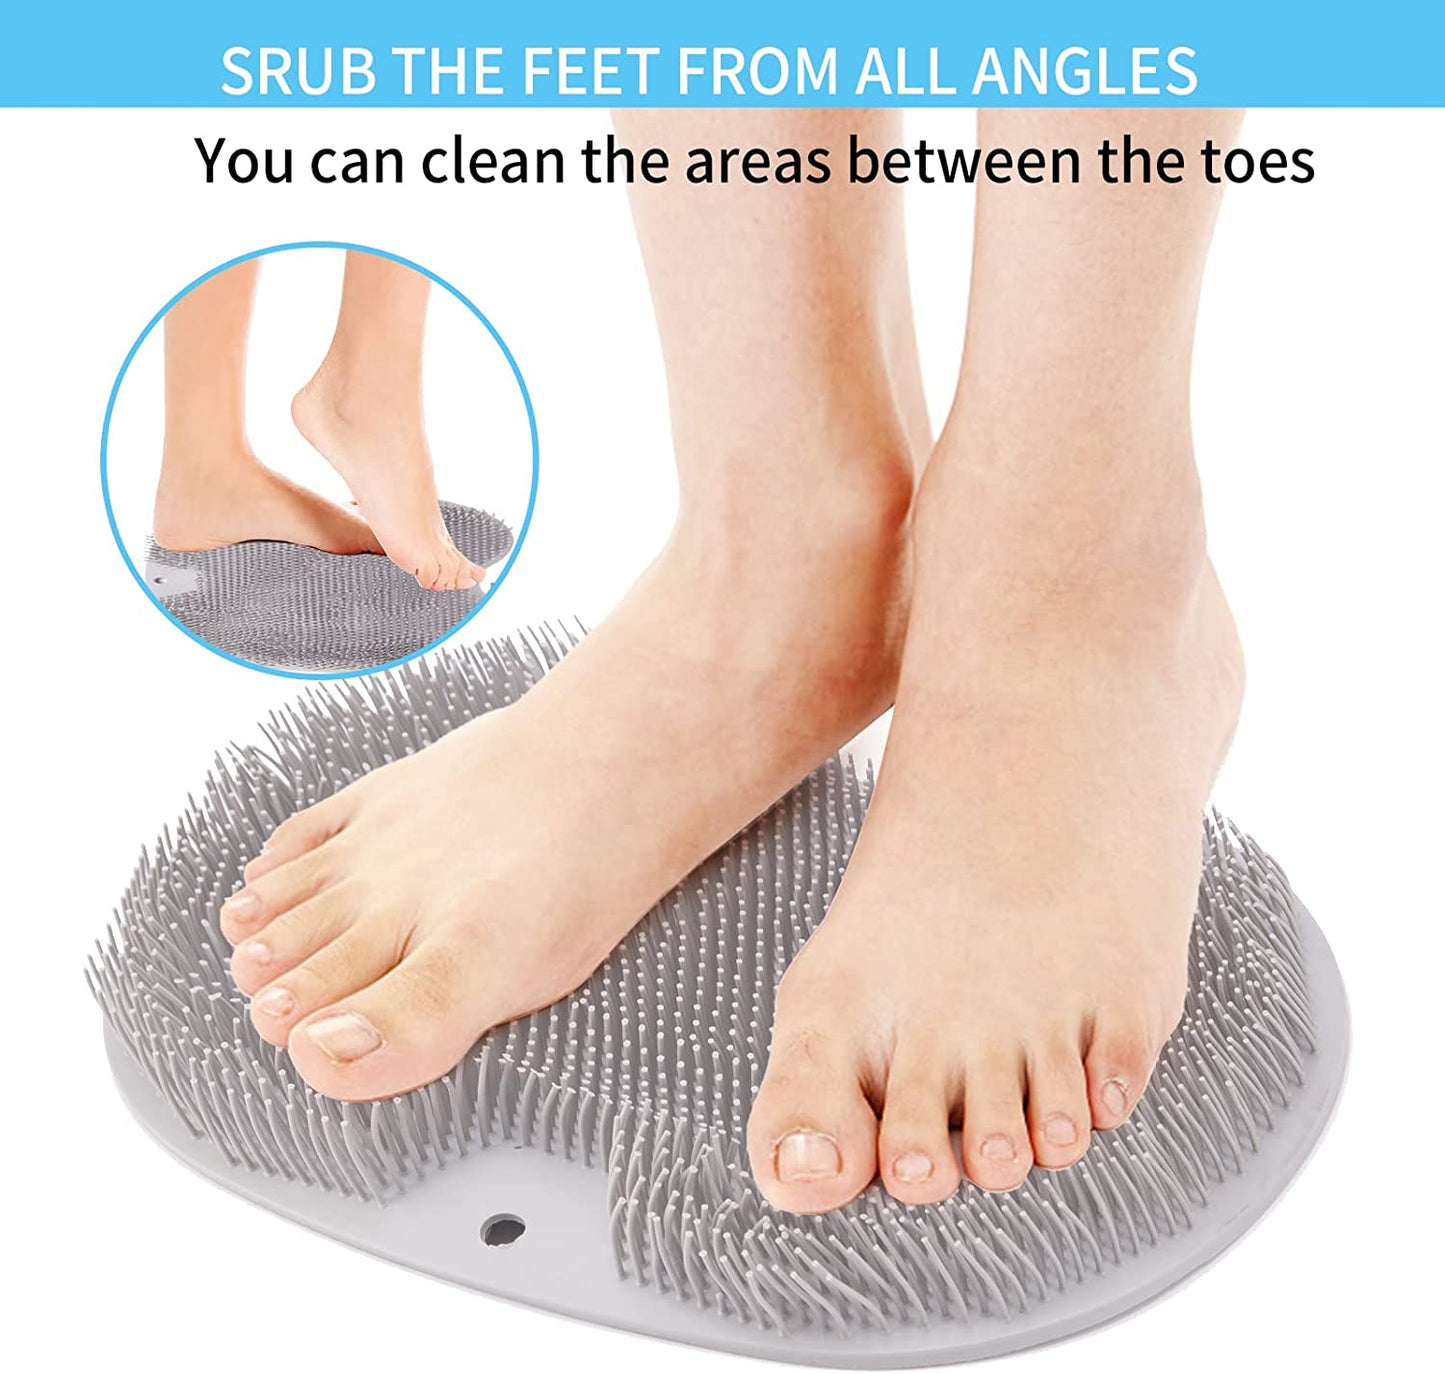 Libara Foot Scrubber for Use in Shower, Shower Foot Scrubber Massager Cleaner, Feet Cleaner Scrubber, Feet-Pain Reduce Massage Pad, Cleaner and Feet Pain